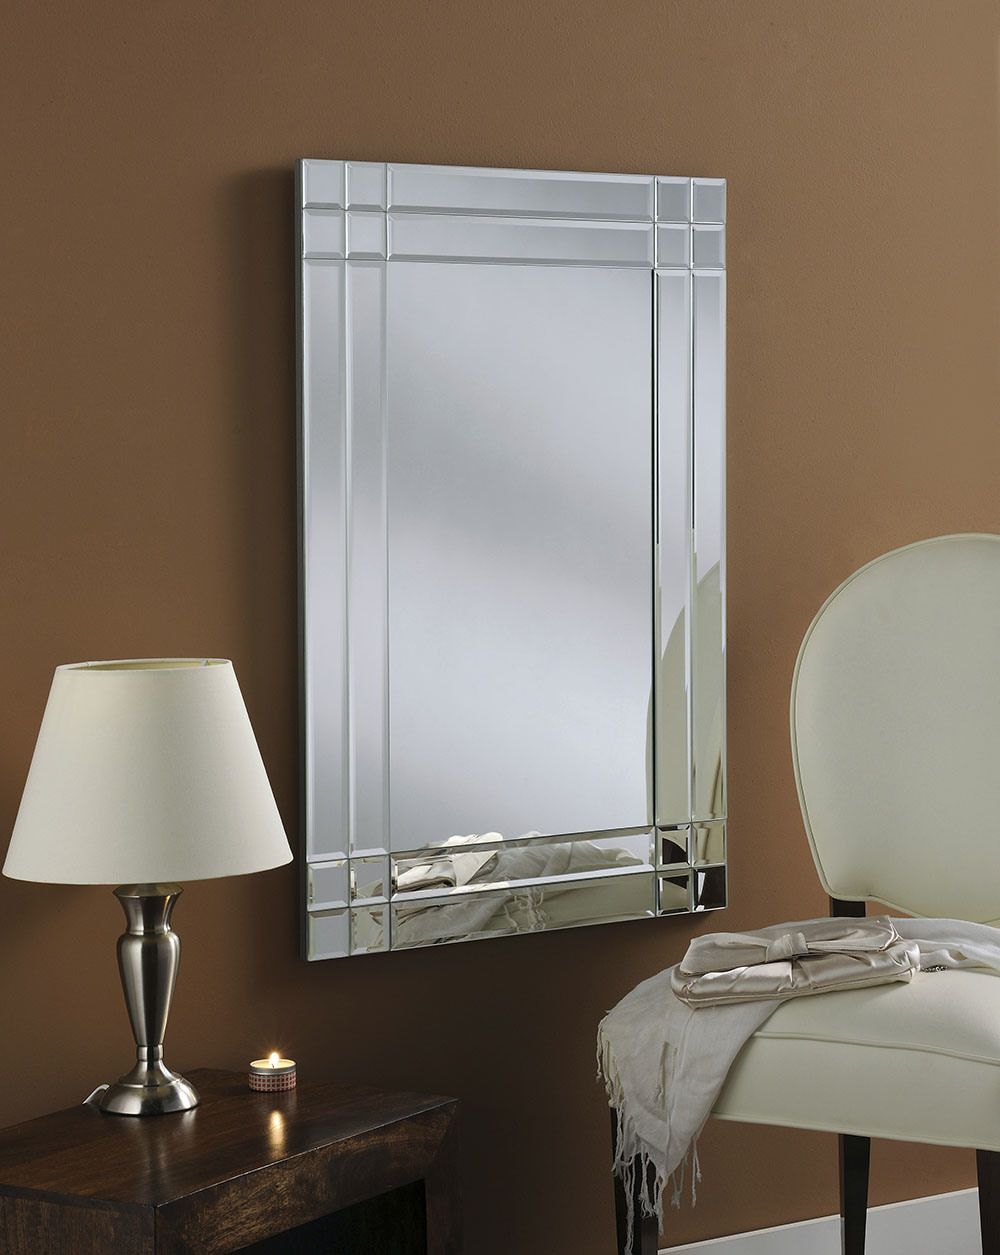 China Vanity Sheffield Home Decorative Modern Wall Mirror – China Within Loftis Modern &amp; Contemporary Accent Wall Mirrors (View 4 of 15)